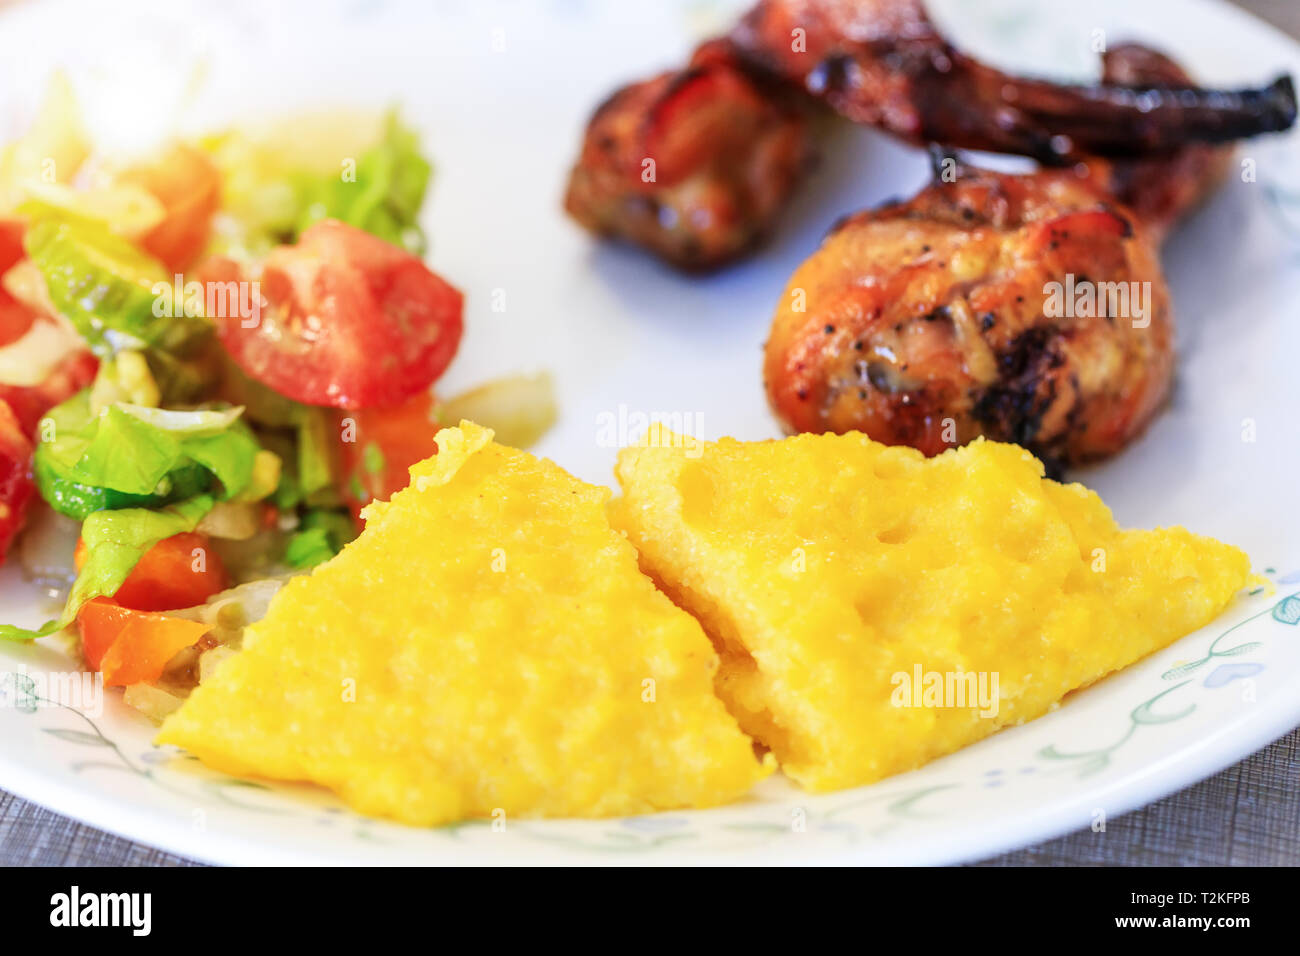 Polenta or Mamaliga, baked chicken legs and salad in fancy plate. Traditional food and culinary culture specific for Balkan countries like Romania, Mo Stock Photo